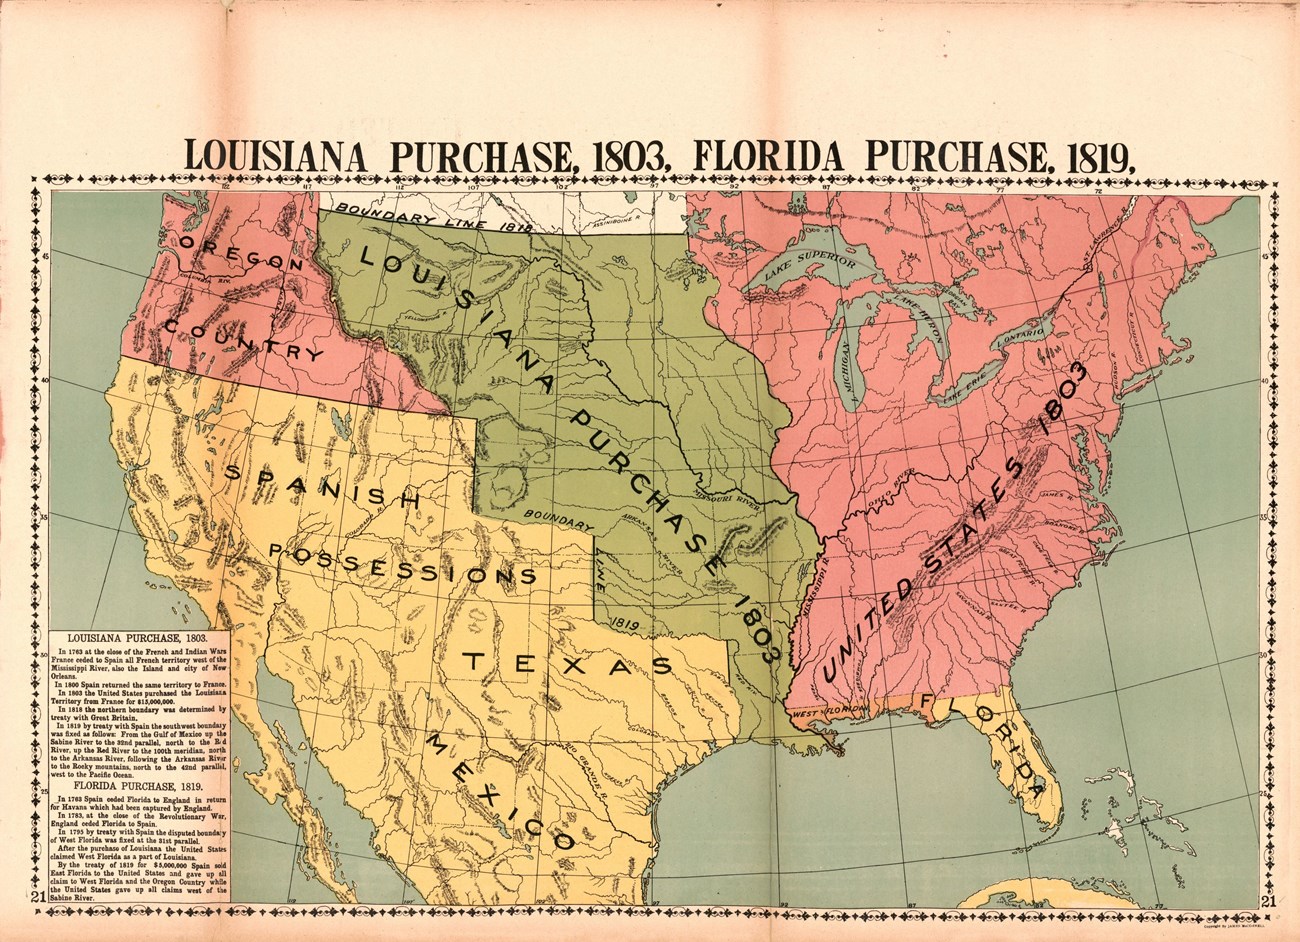 Map of the United States in 1803, showing the Louisiana Purchase